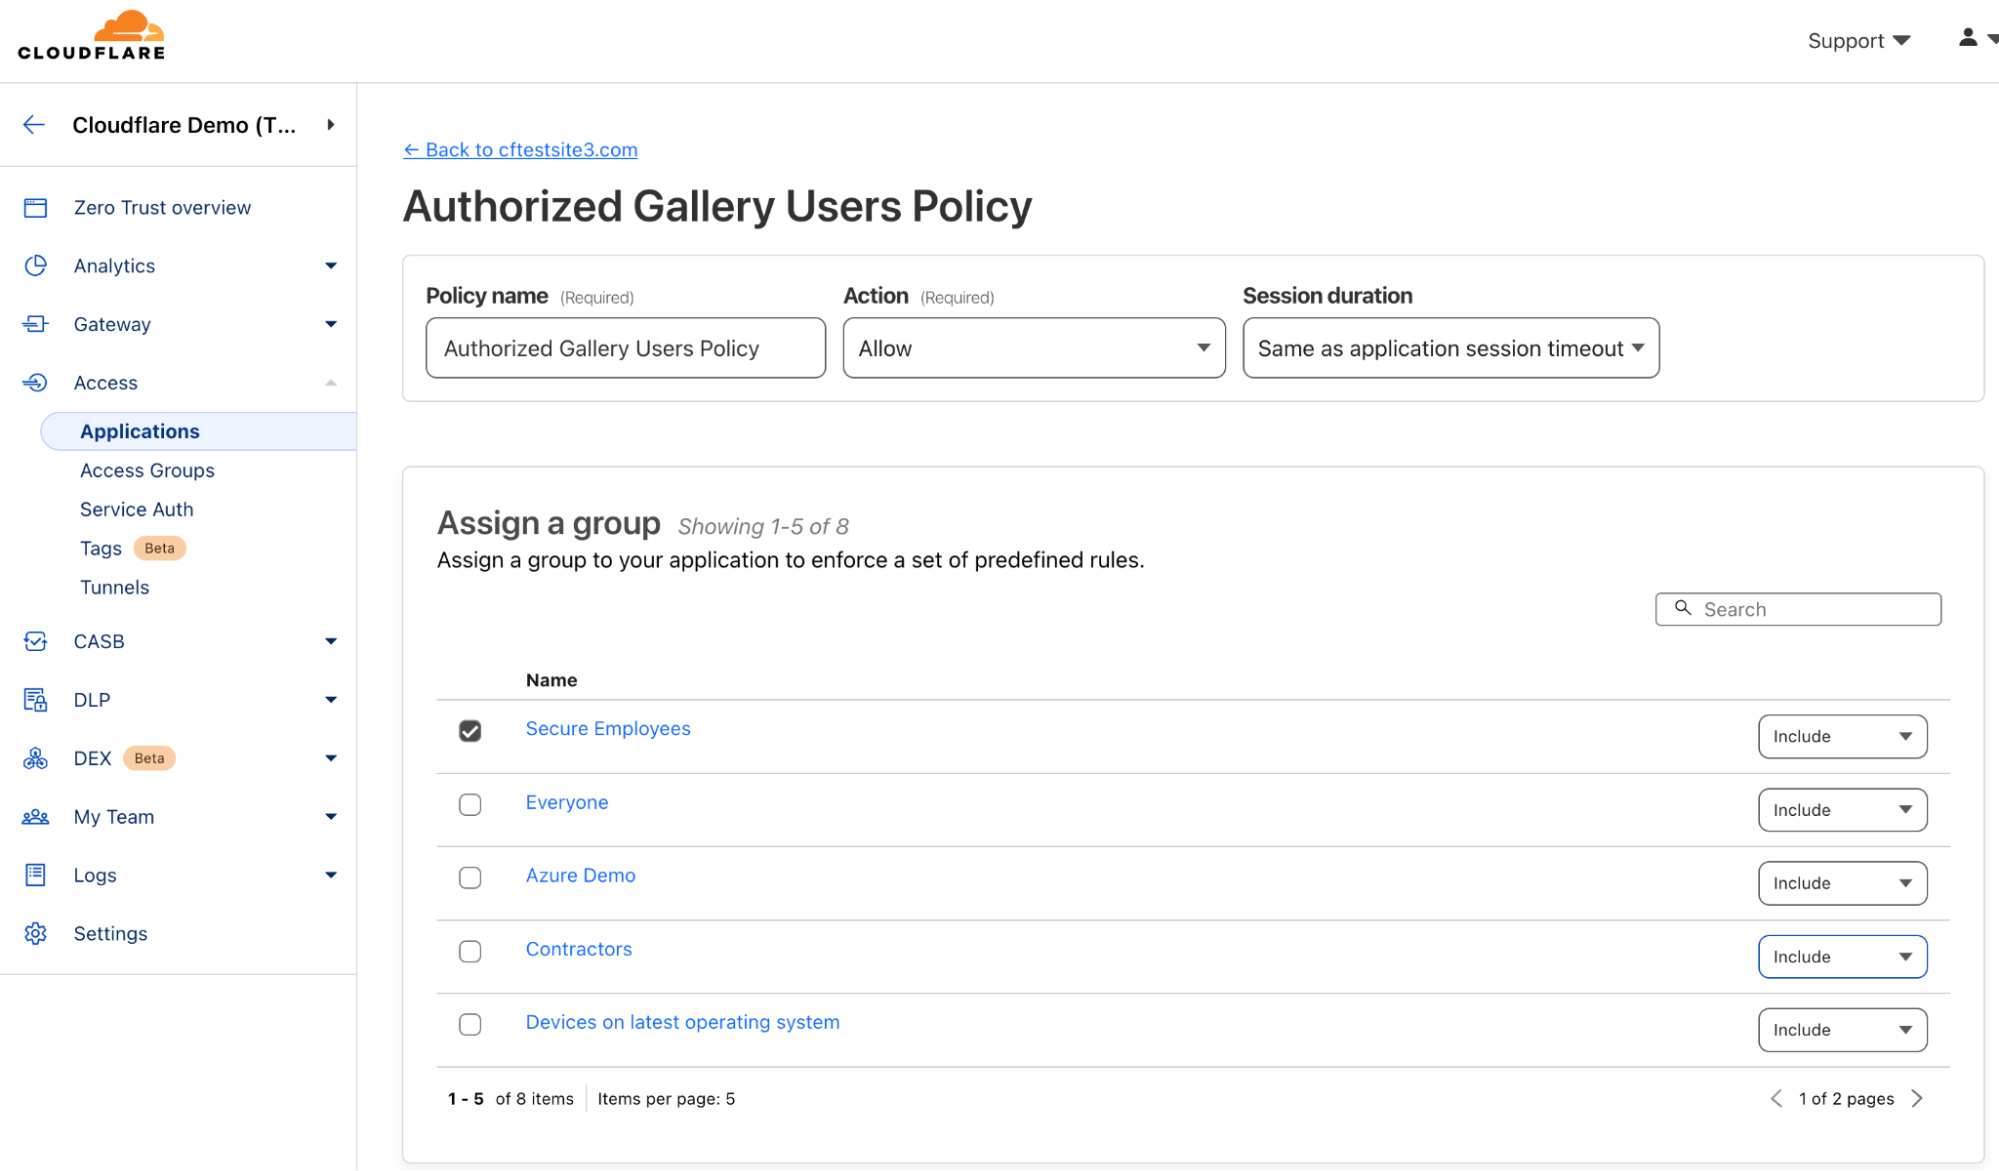 Cloudflare allows assigning multiple Access groups to an application to enforce a set of predefined policies.